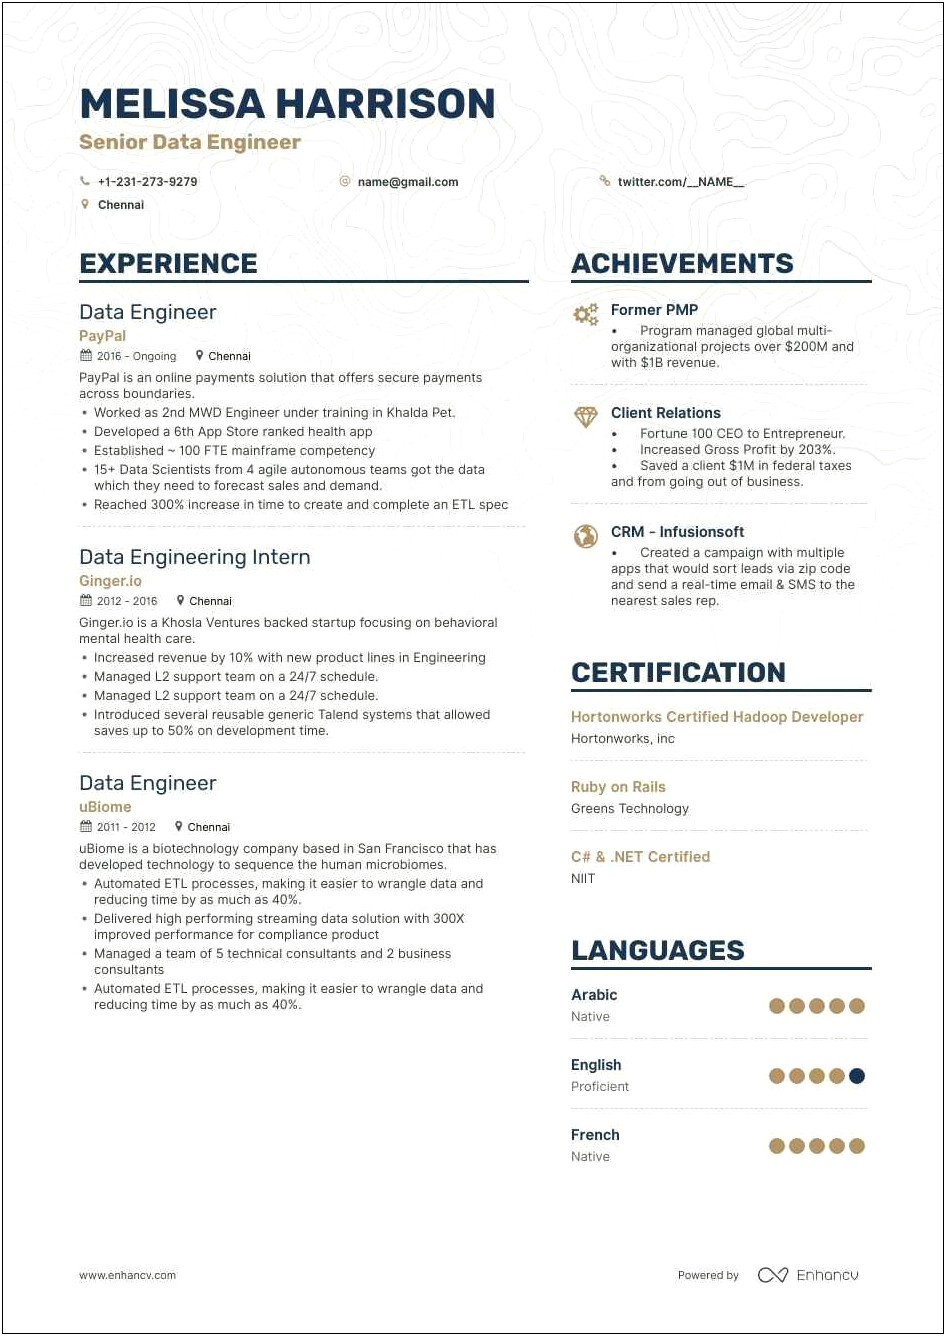 Working At A Pet Store Resume